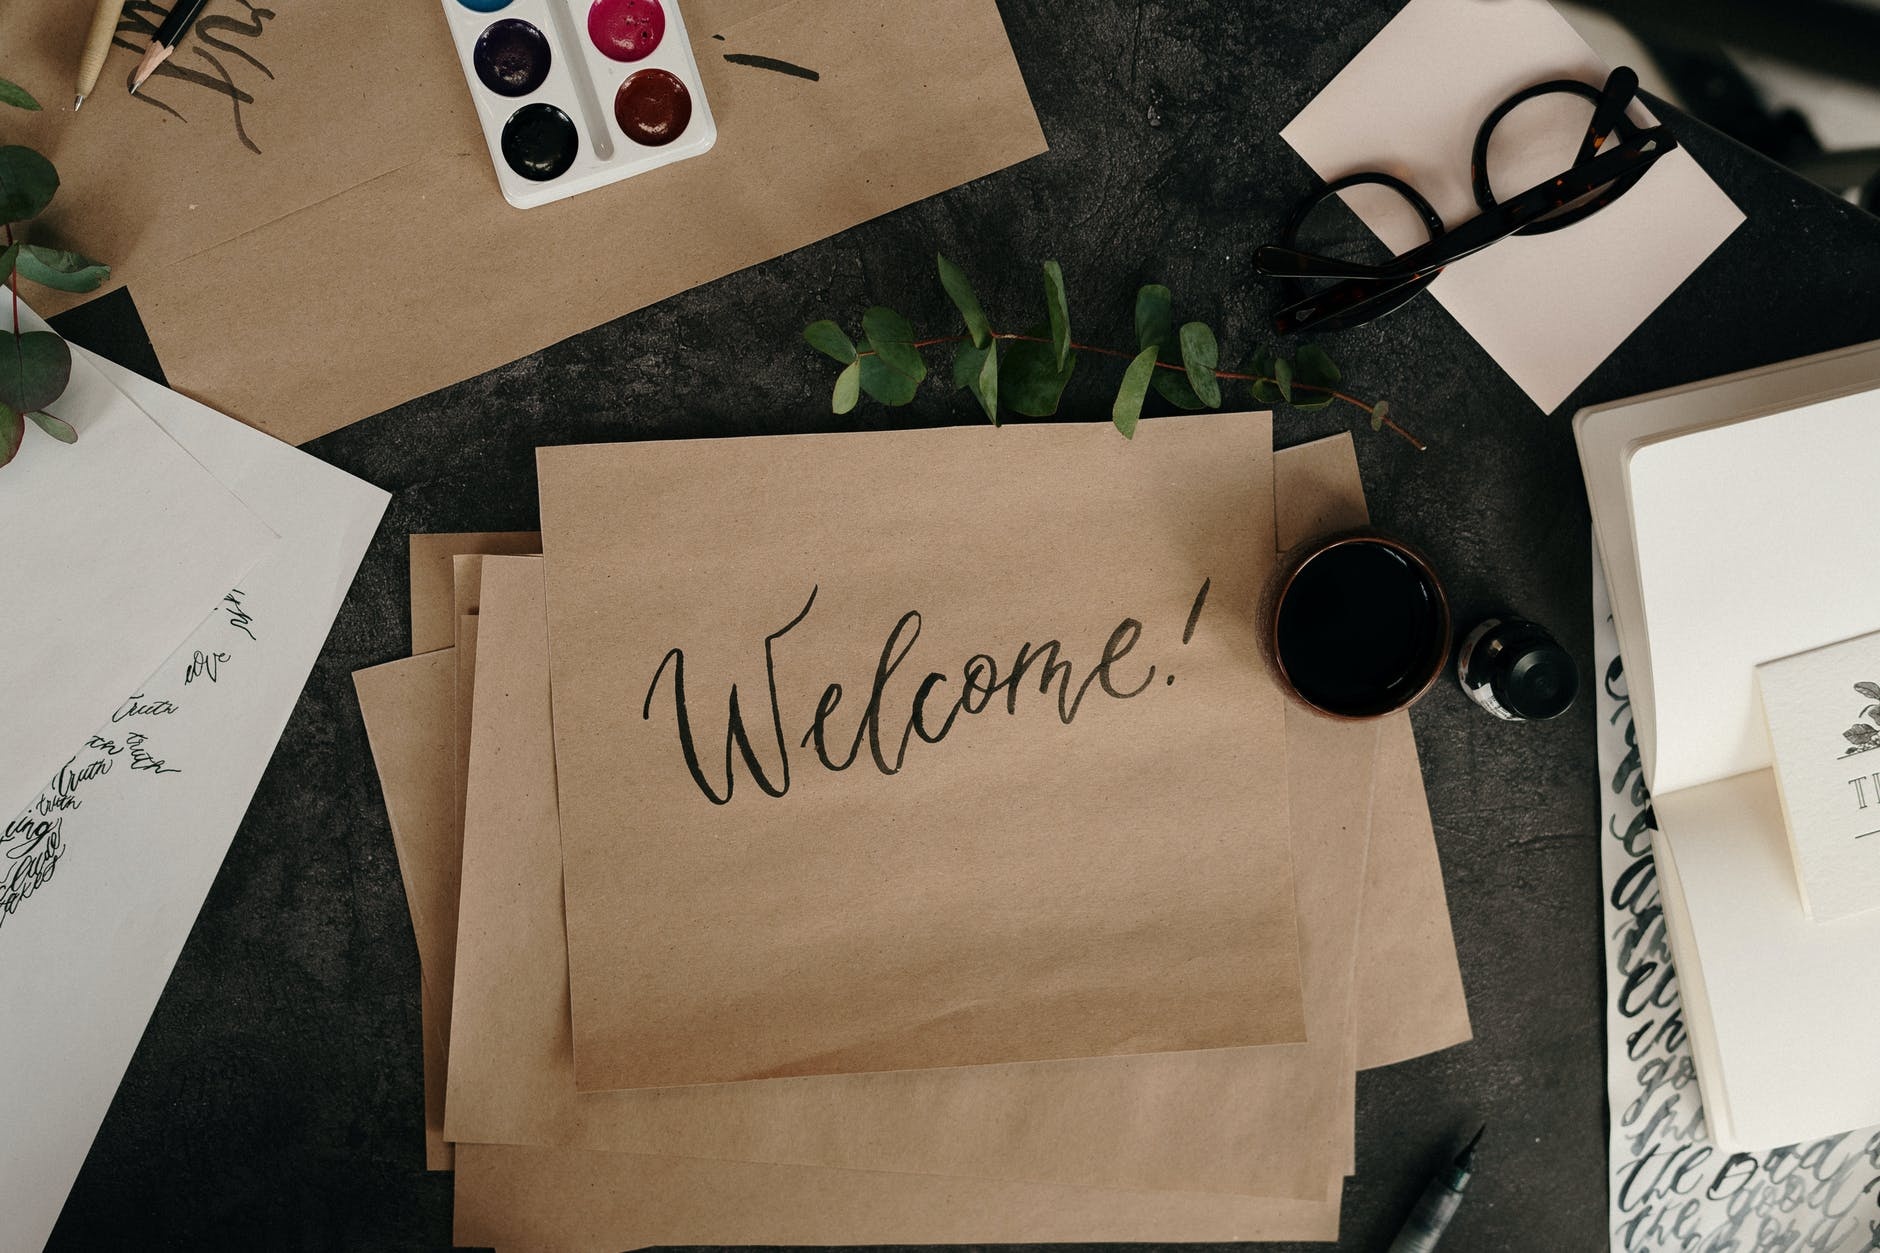 19-items-your-new-hires-expect-to-see-in-their-welcome-kit